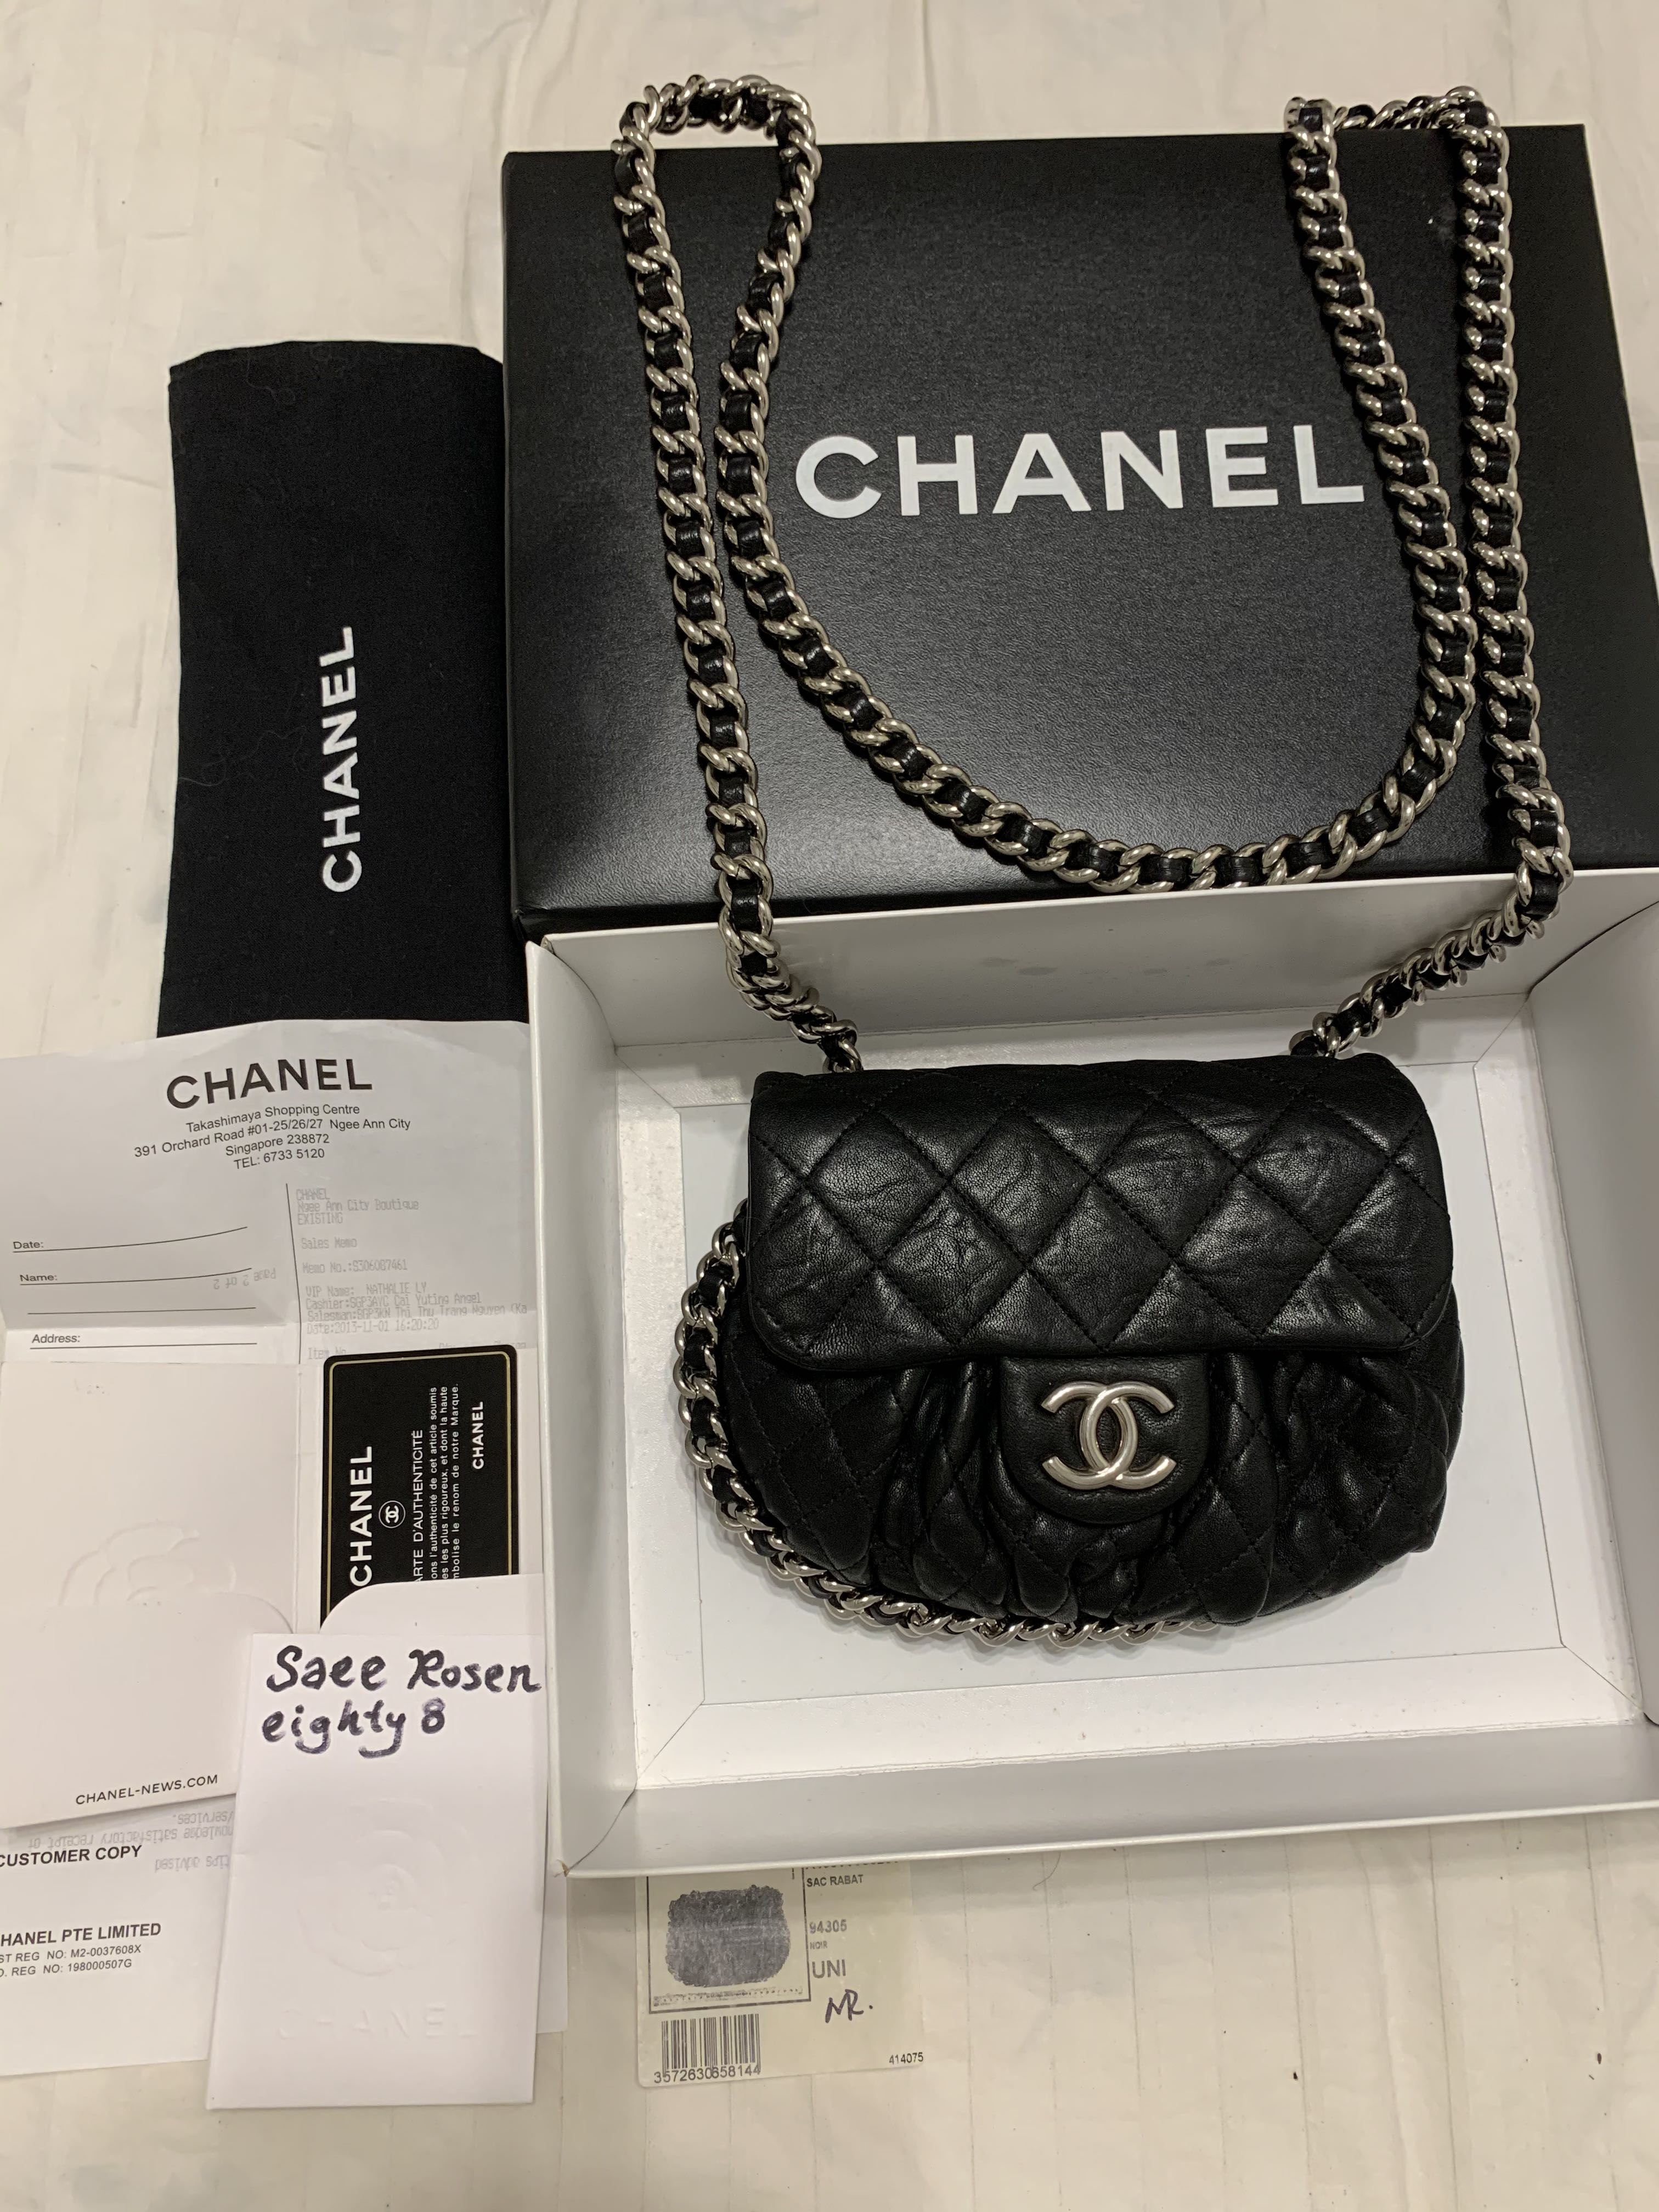 Chanel Mini Handle Flap Coin Purse With Chain Black Lambskin Gold Hard –  Coco Approved Studio